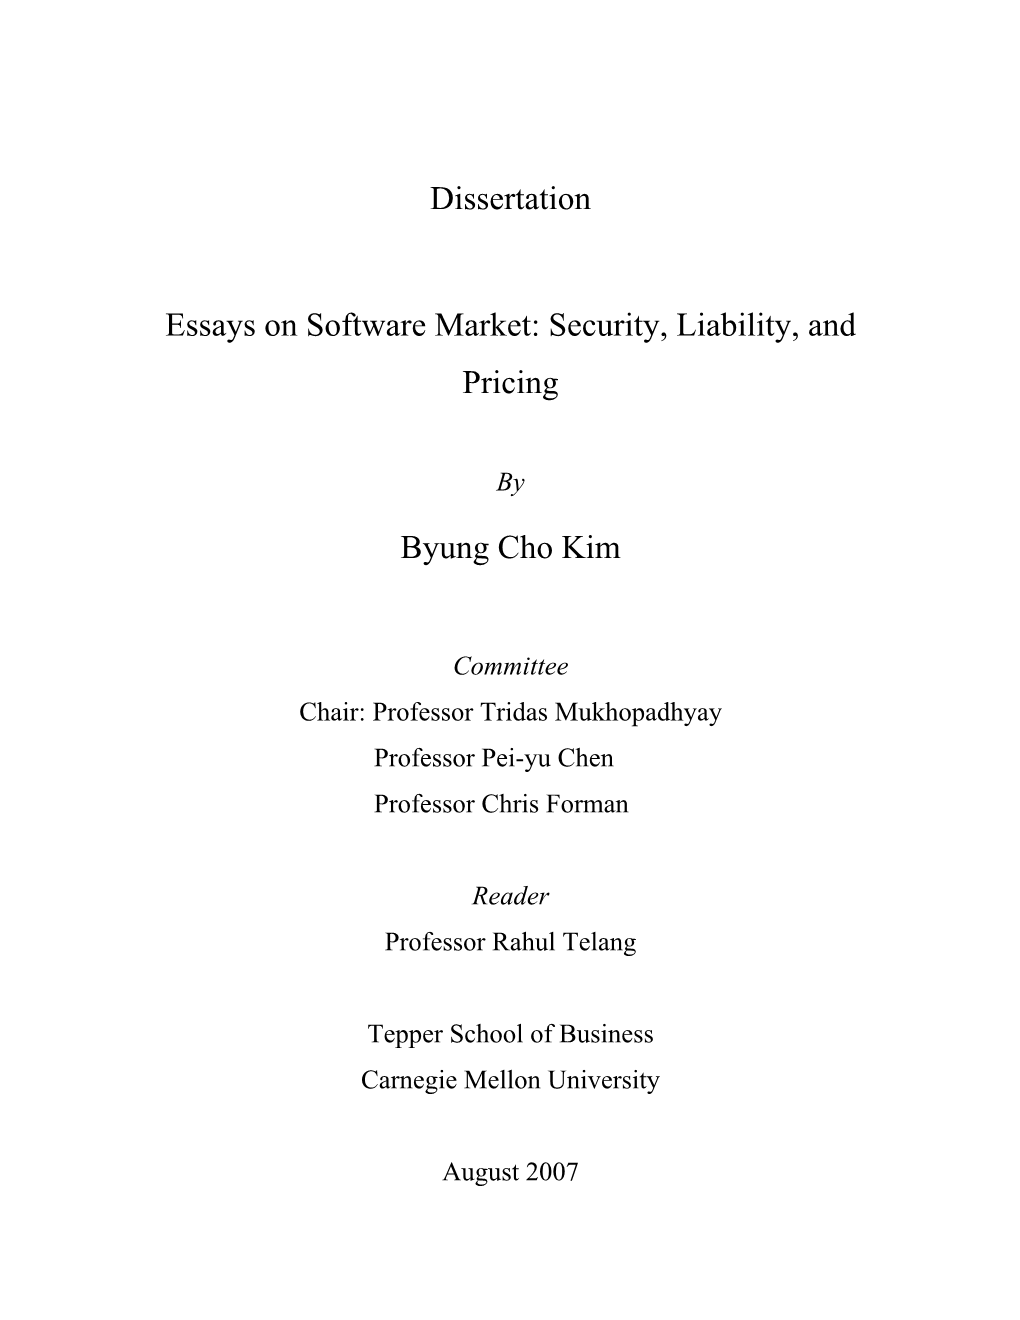 Essays on Software Market: Security, Liability, and Pricing